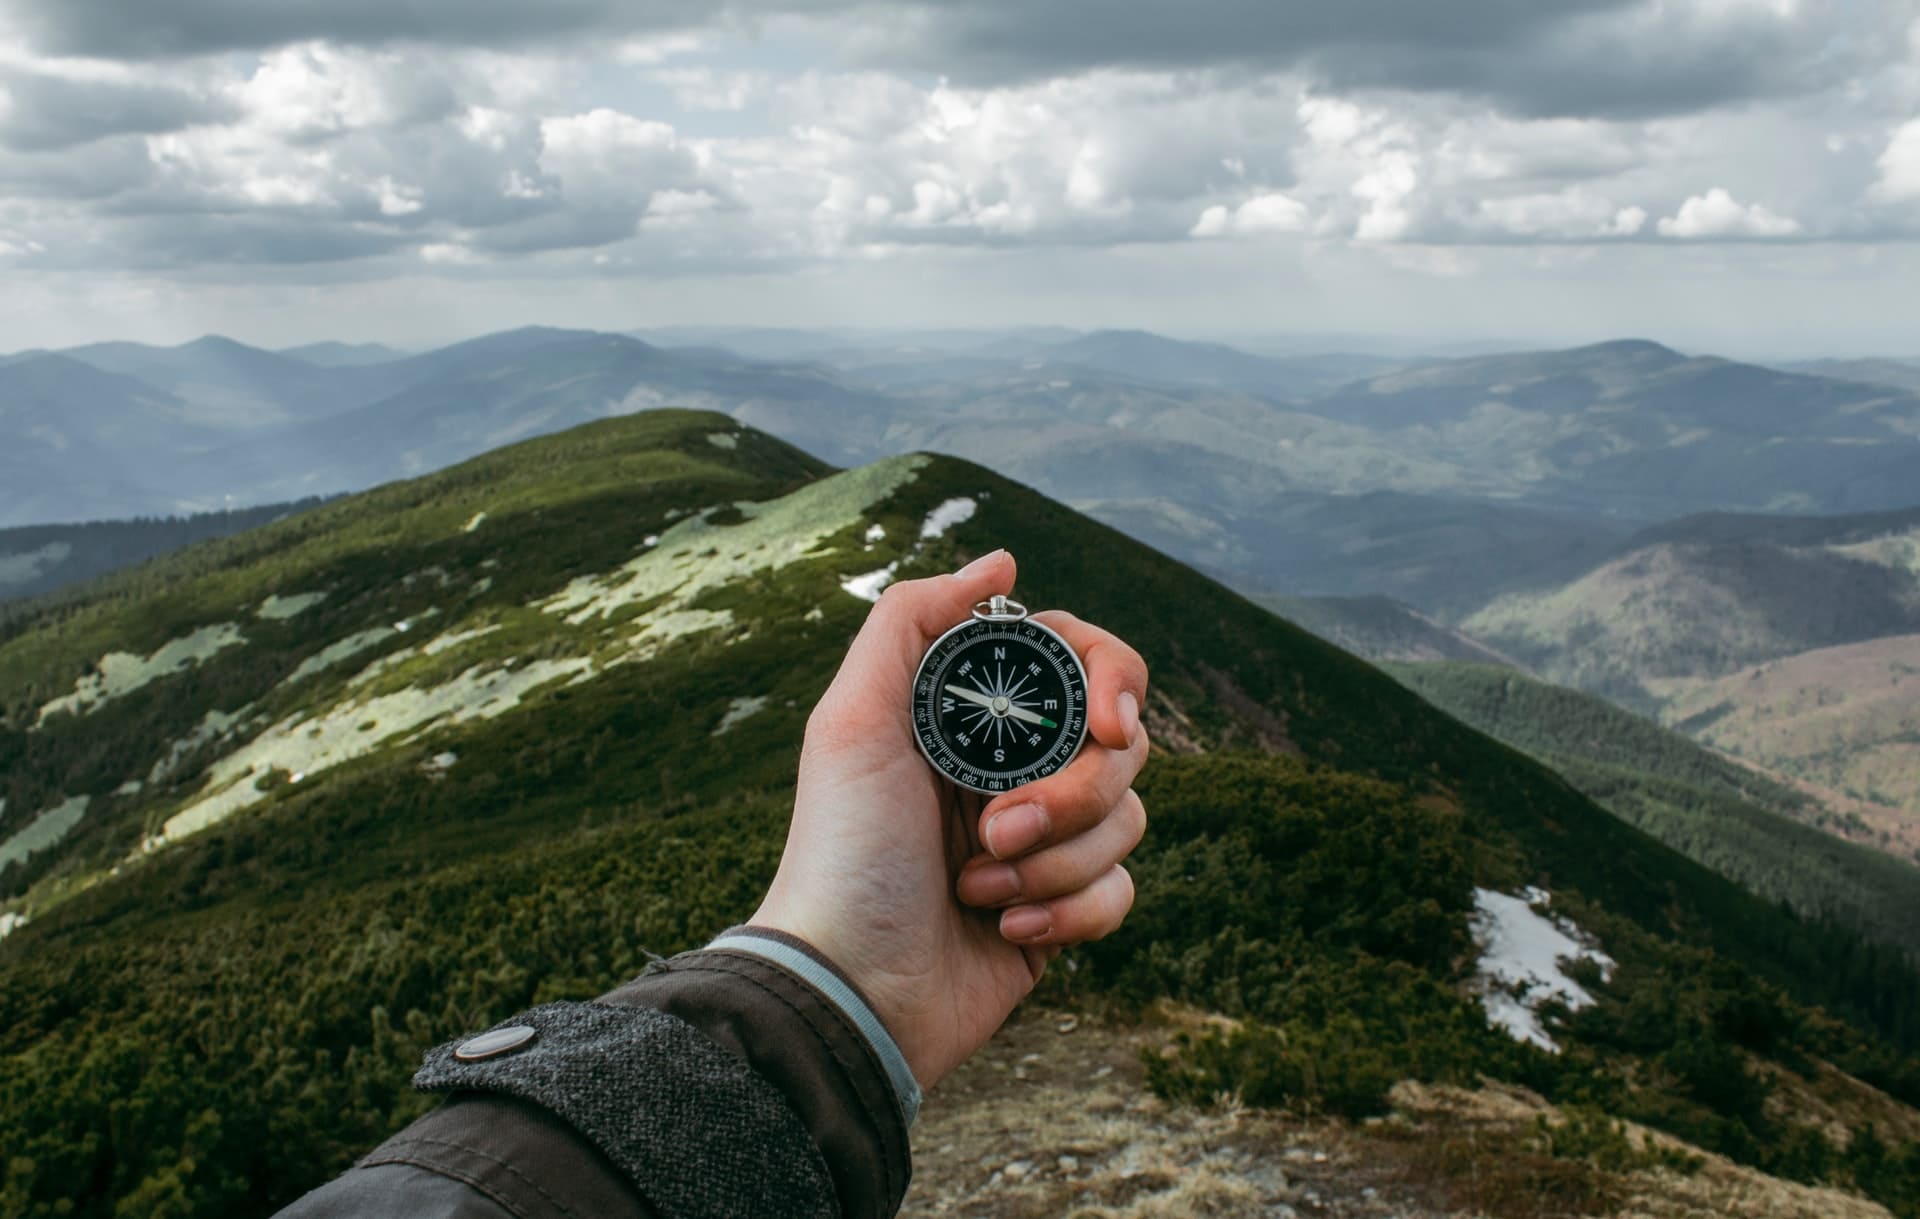 A compass held out in front of the camera with mountains and cloudy skies in the background.